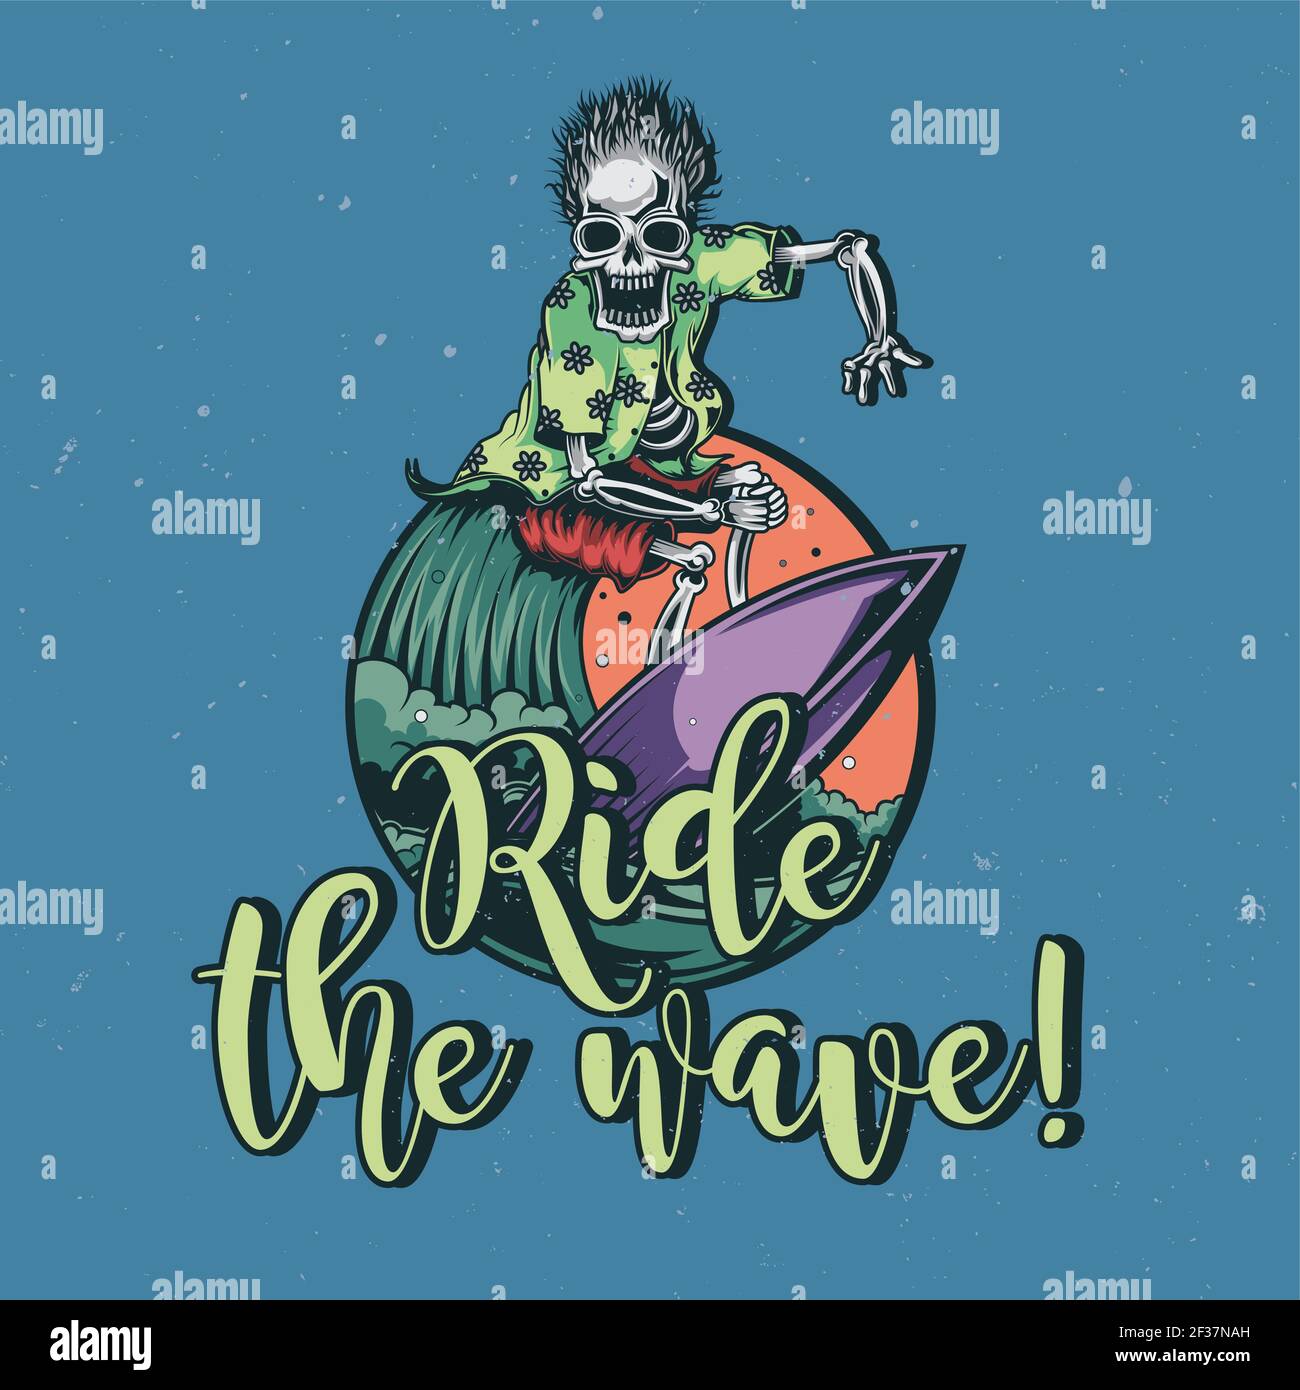 T-shirt or poster design with illustration of skeleton on surfing board Stock Vector